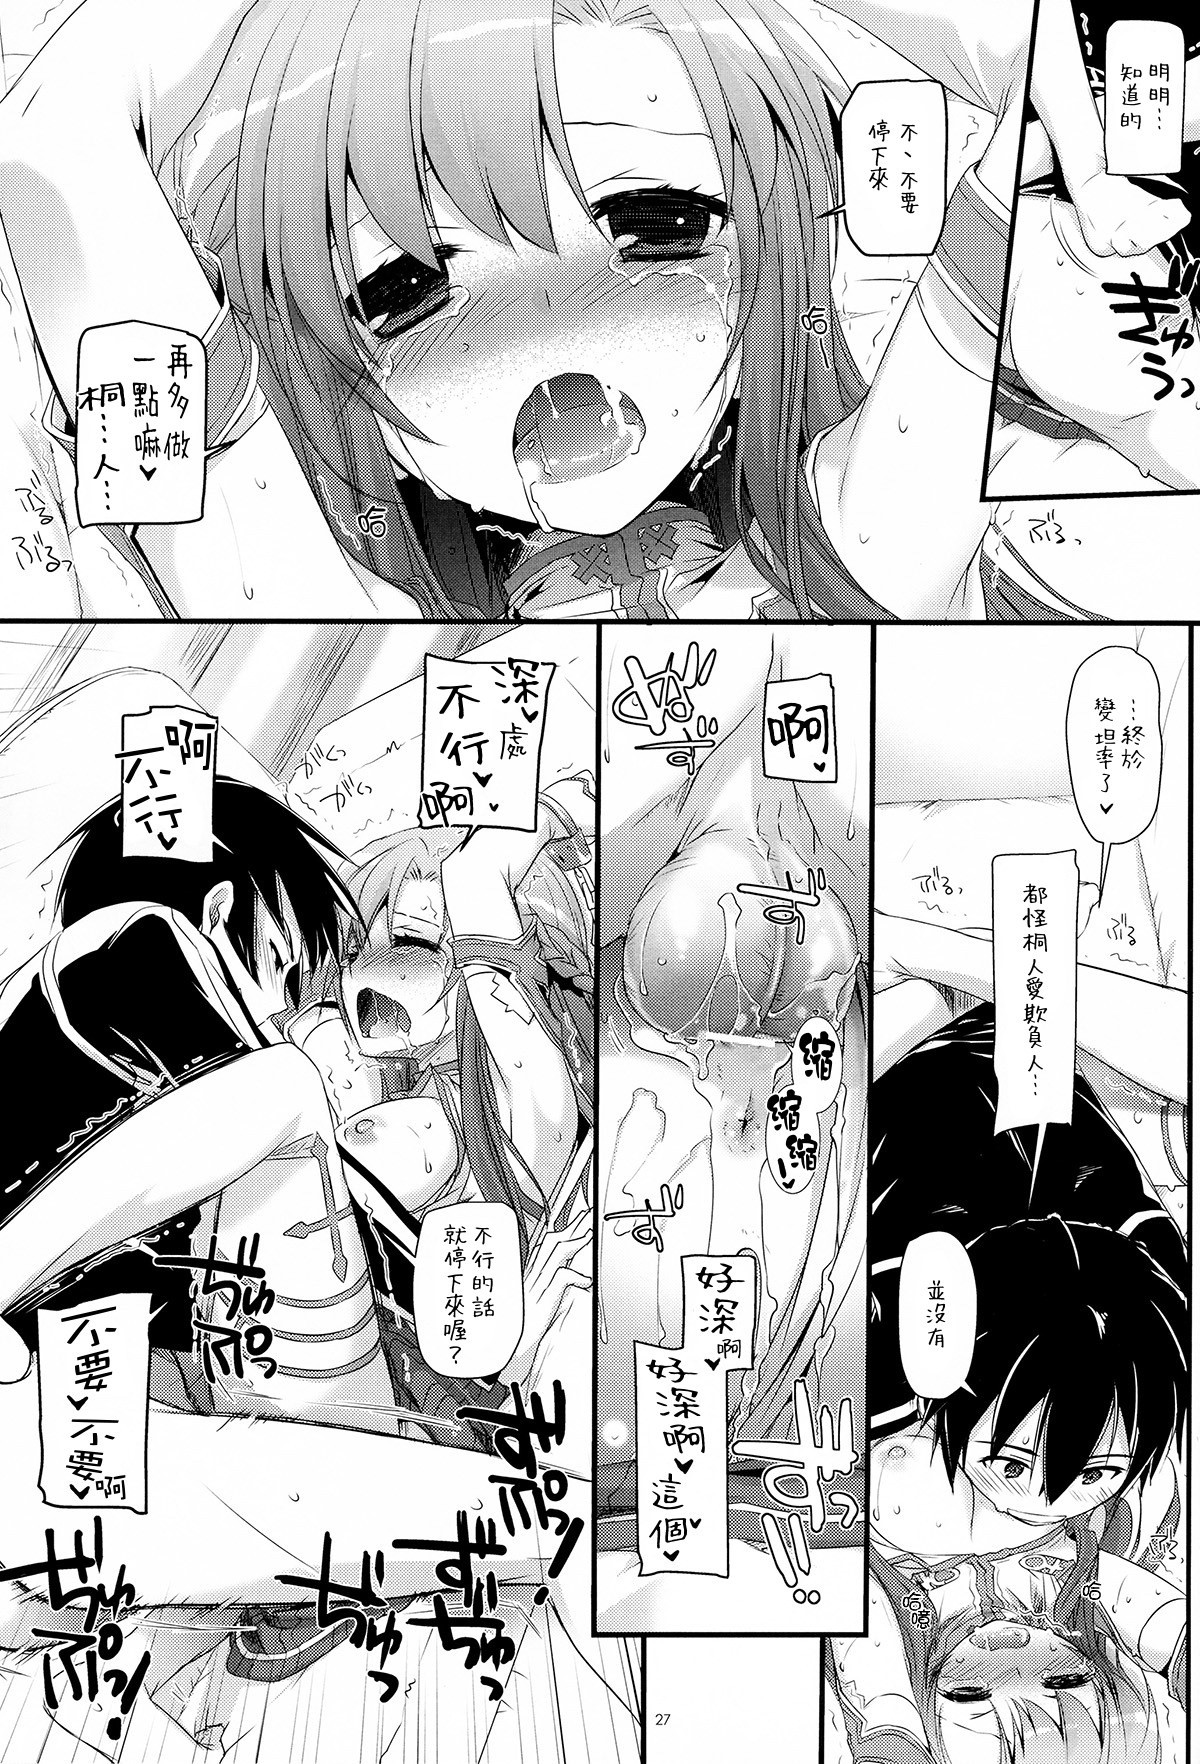 D.L. Action 71 hentai manga picture 26